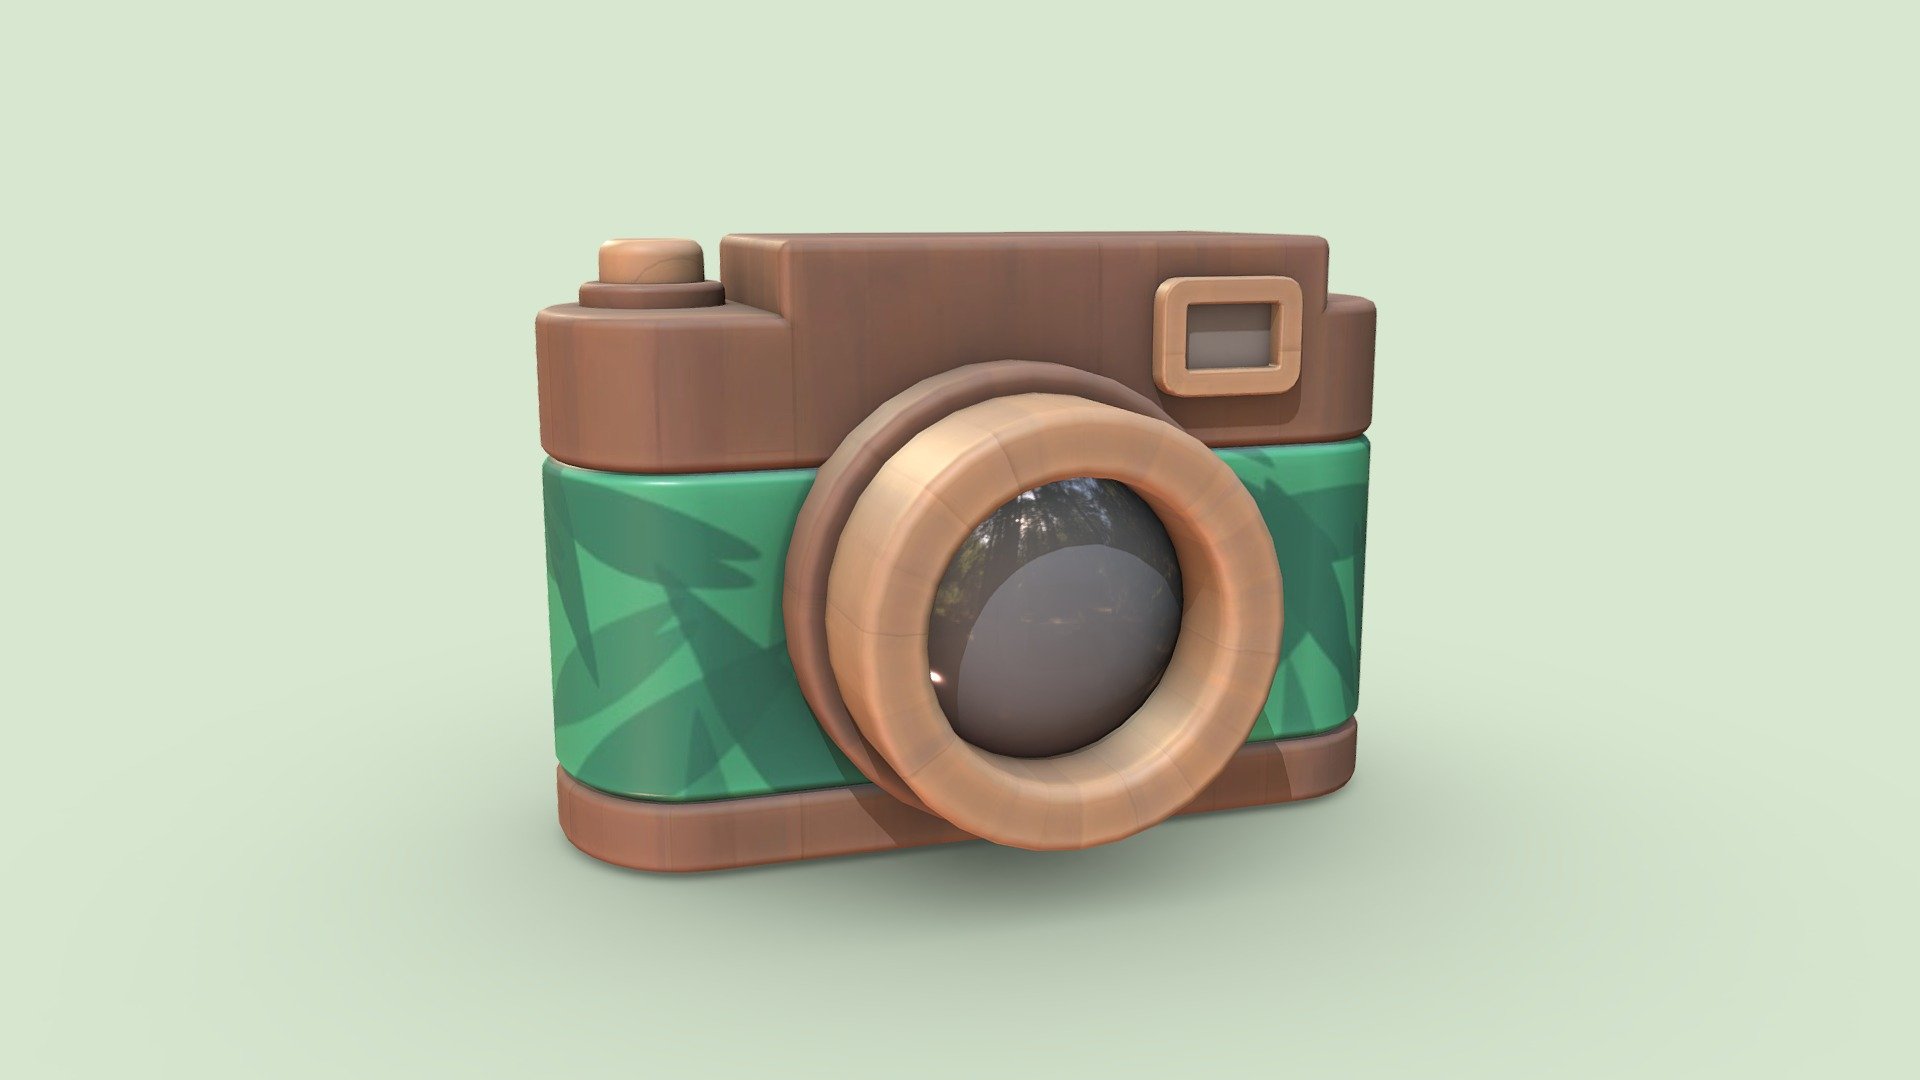 A camera texture variant for a small project I am working on for learning languages! - Cute Camera - Tropical Variant - 3D model by autumnpioneer 3d model